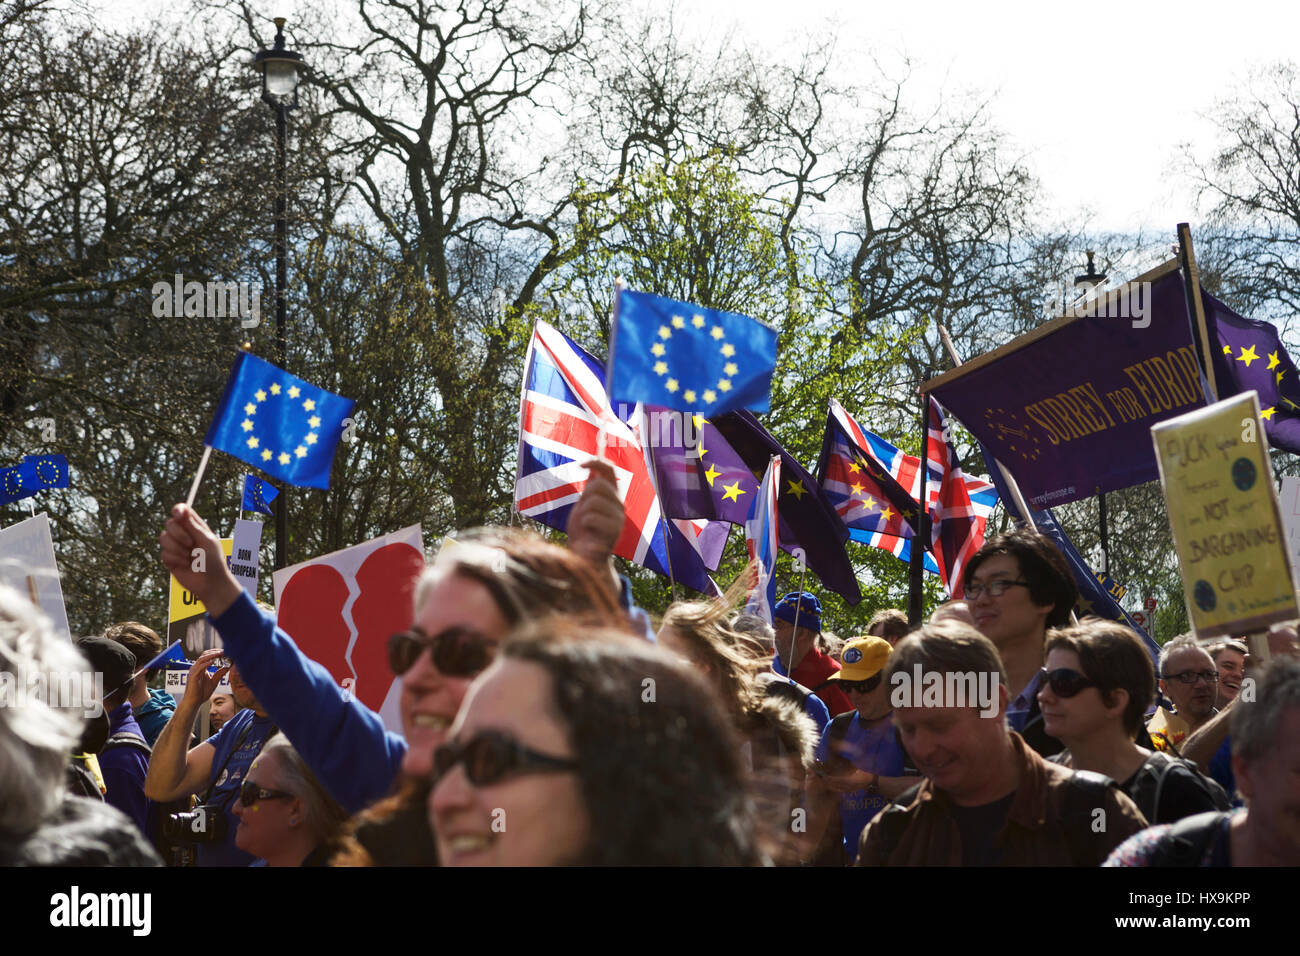 London, UK. 25th March 2017. Unite for Europe organised a Pro EU march in London. Anti-BREXIT demonstrators march from Park Lane to Parliament Square. People's vote. Credit: Tony Farrugia/Alamy Live News Stock Photo